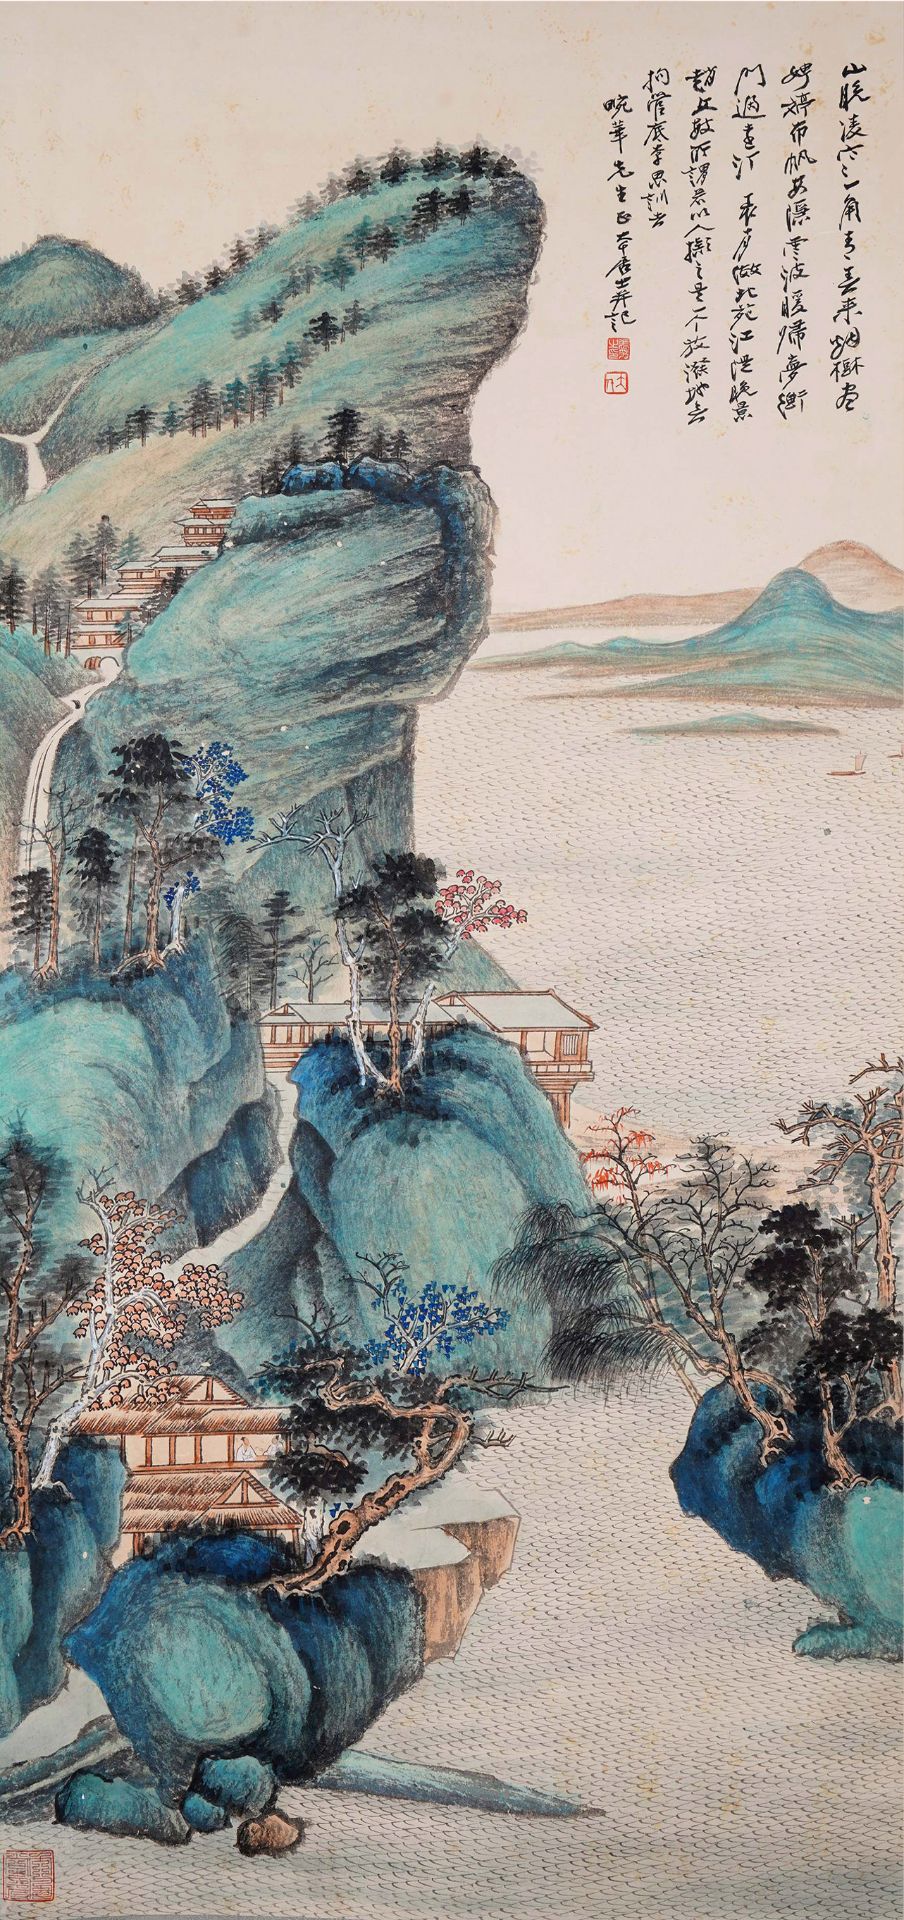 A Chinese Scroll Painting by Zhang Daqian - Image 2 of 10